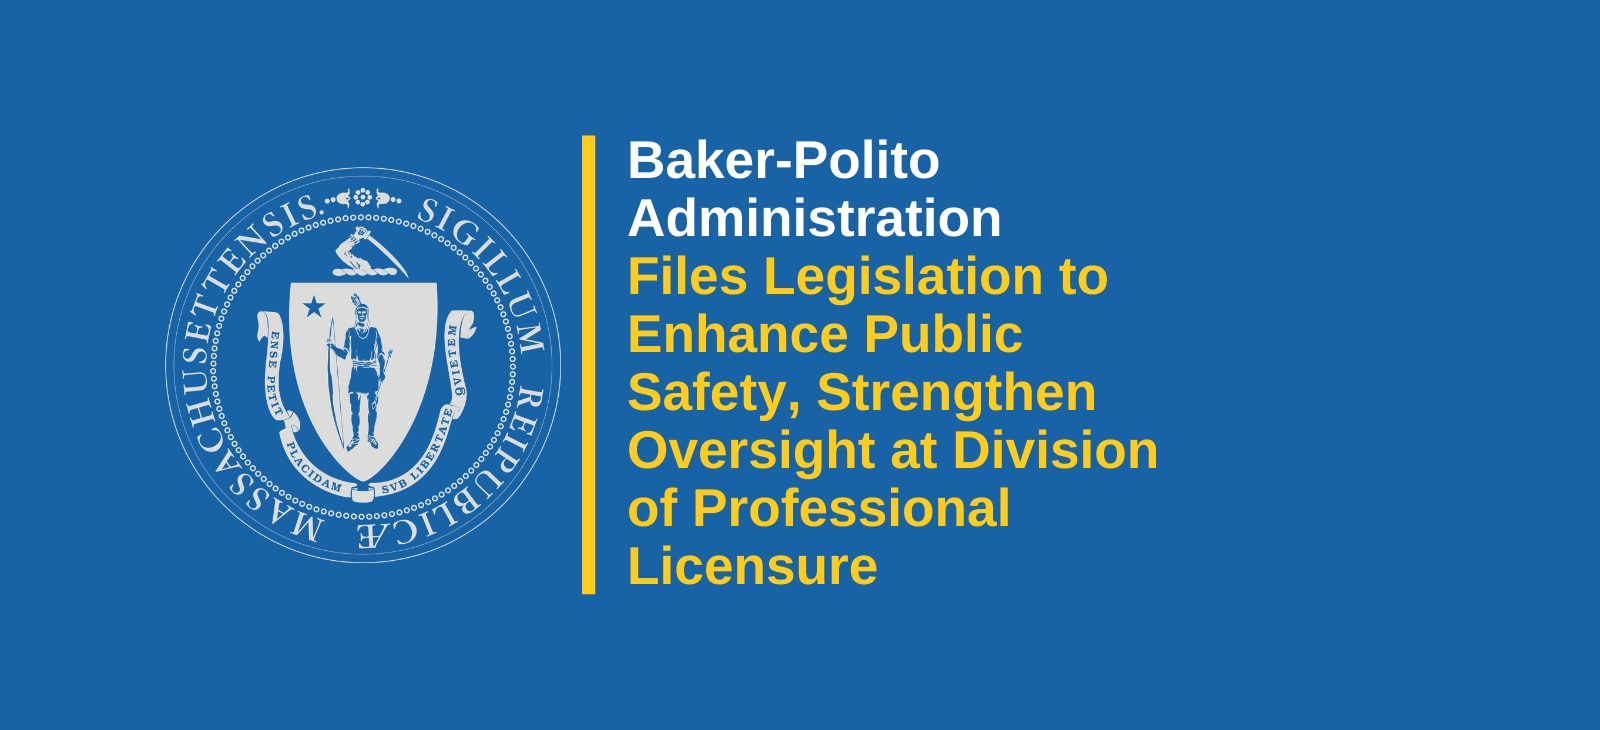 Baker-Polito Administration Files Legislation to Enhance Public Safety, Strengthen Oversight at Division of Professional Licensure